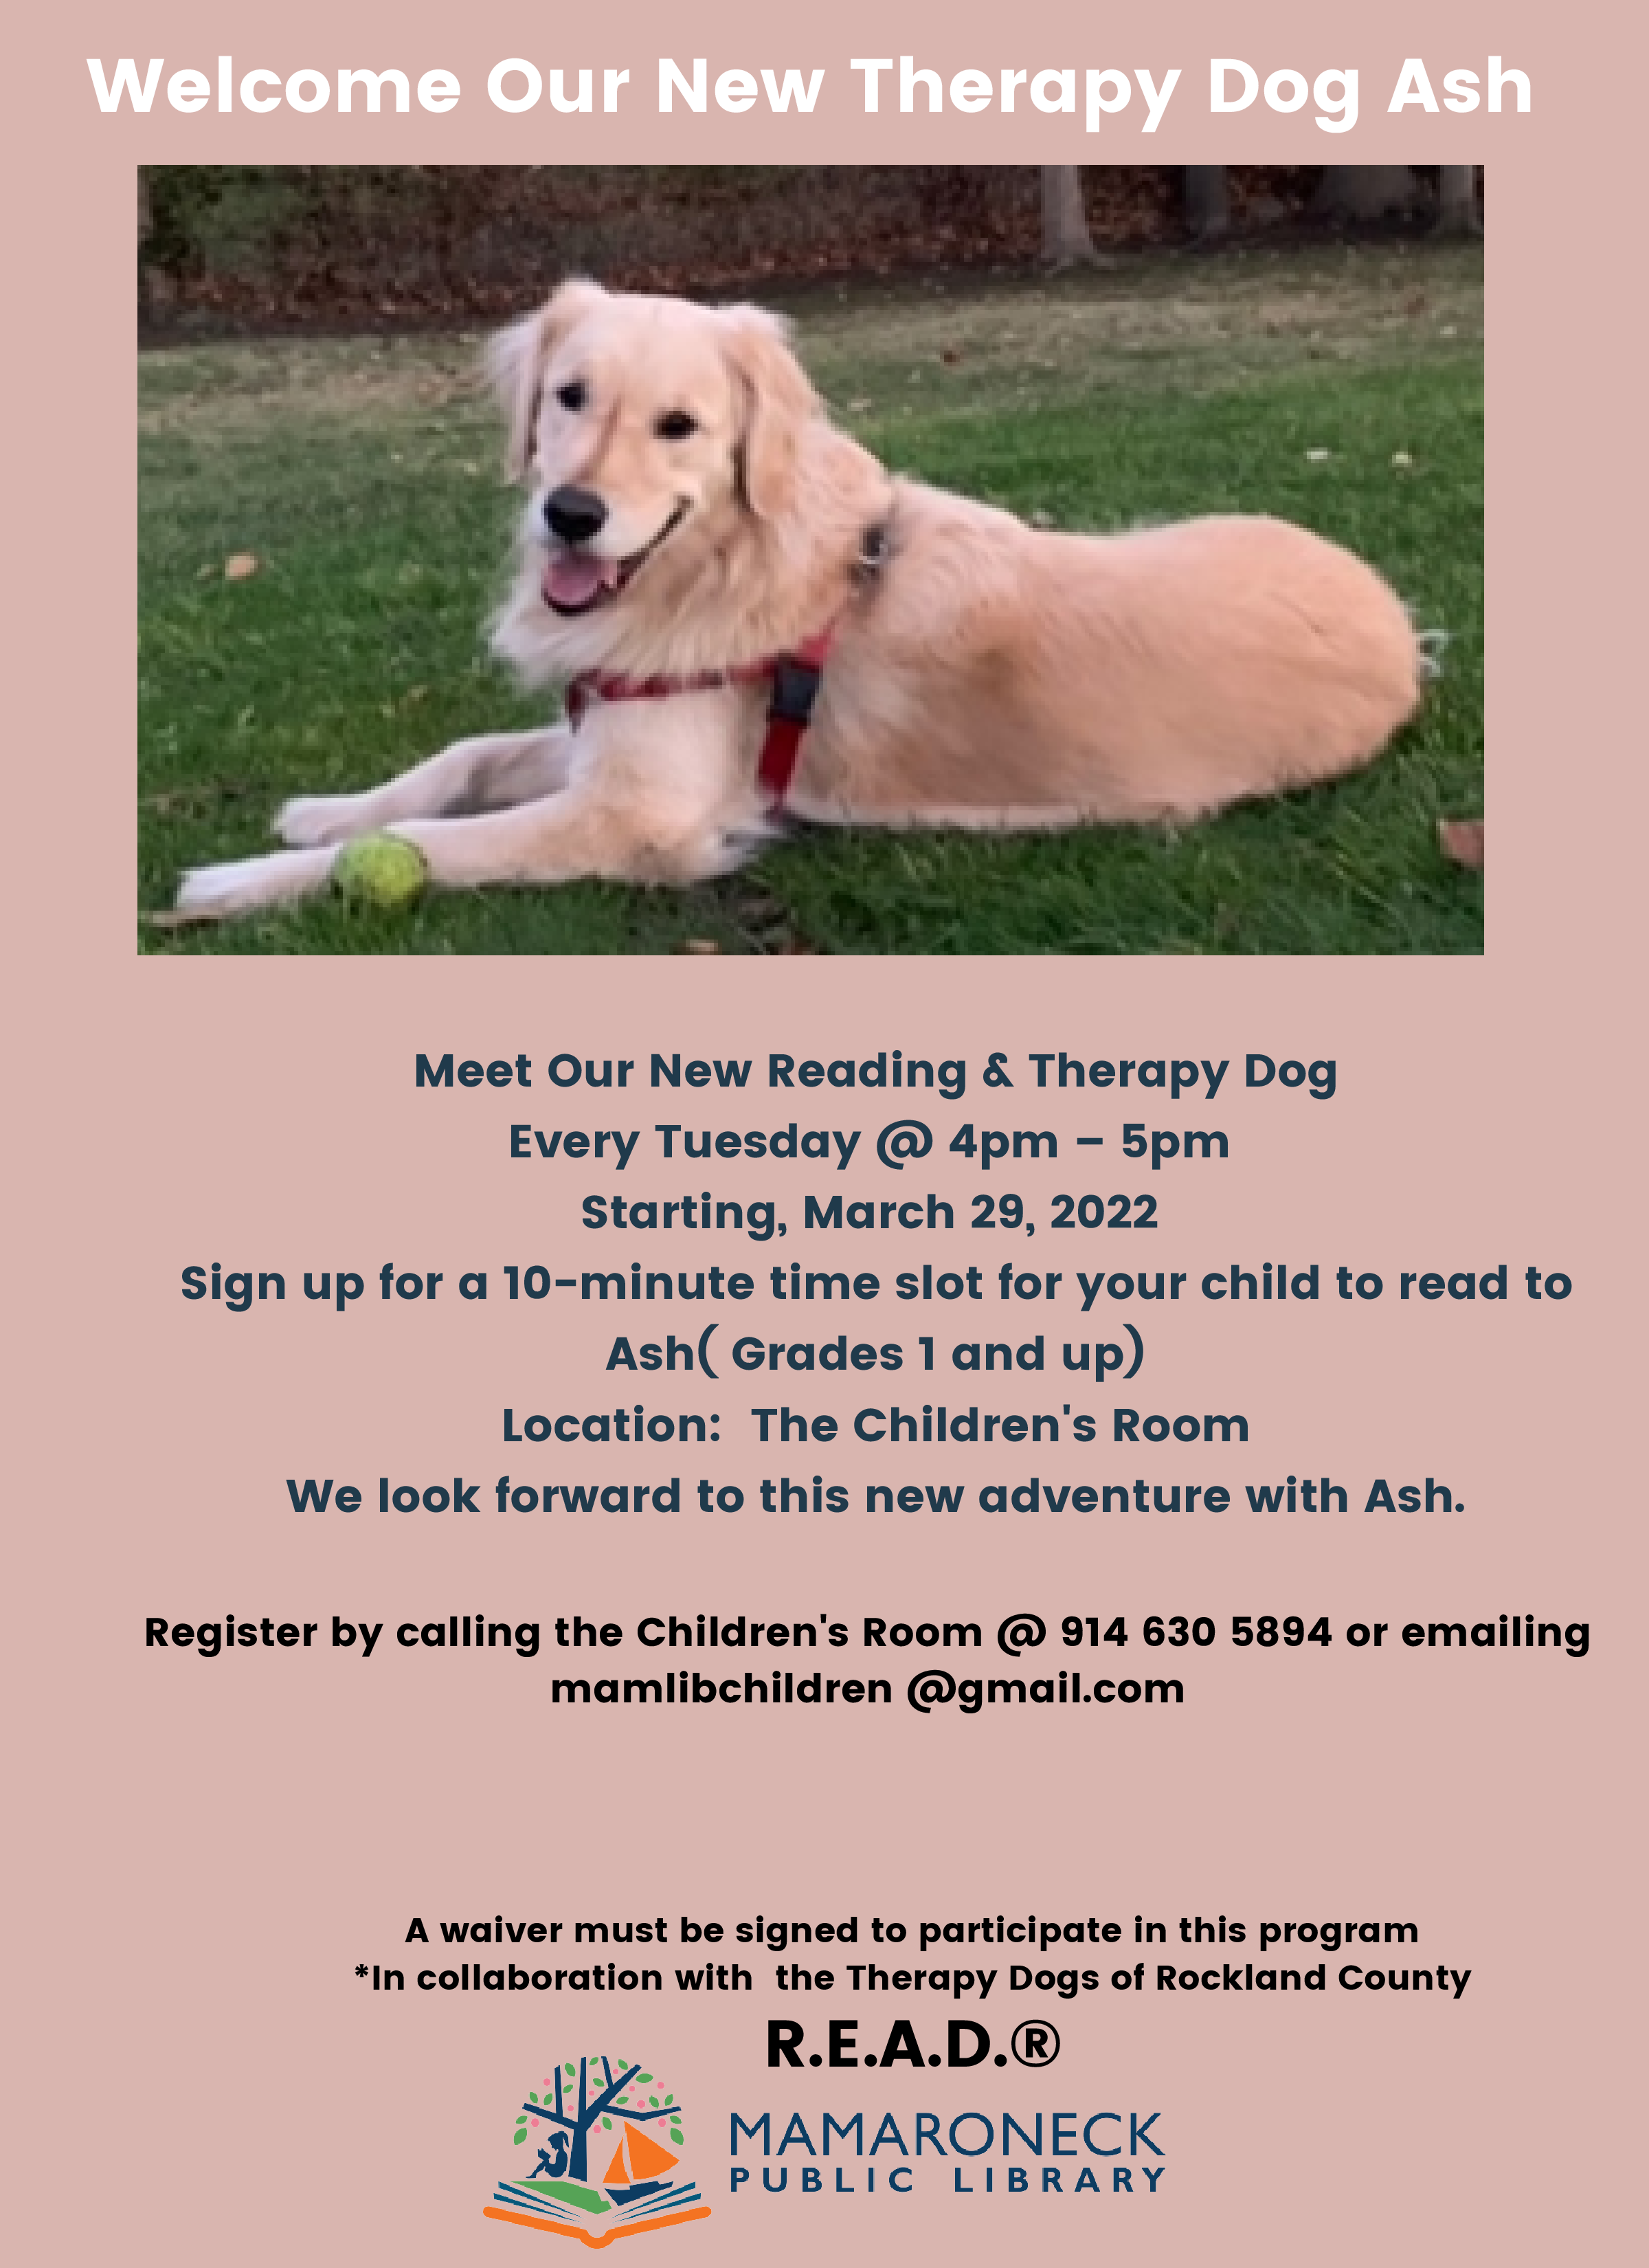 Children can read to our new therapy dog, Ash, beginning March 29